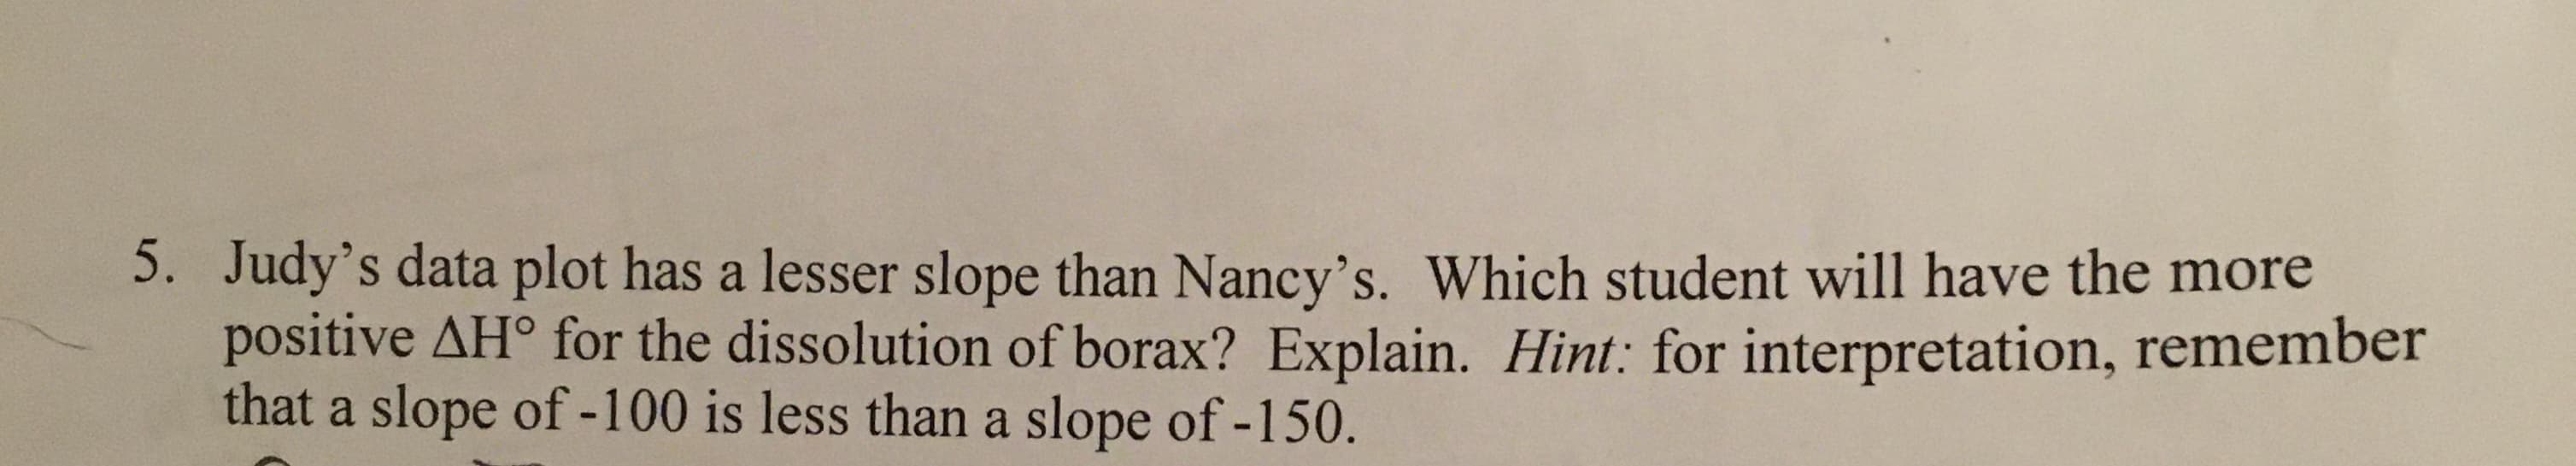 5. Judy's data plot has a lesser slope than Nancy's. Which student will have the more
positive AH° for the dissolution of borax? Explain. Hint: for interpretation, remember
that a slope of -100 is less than a slope of -150.
